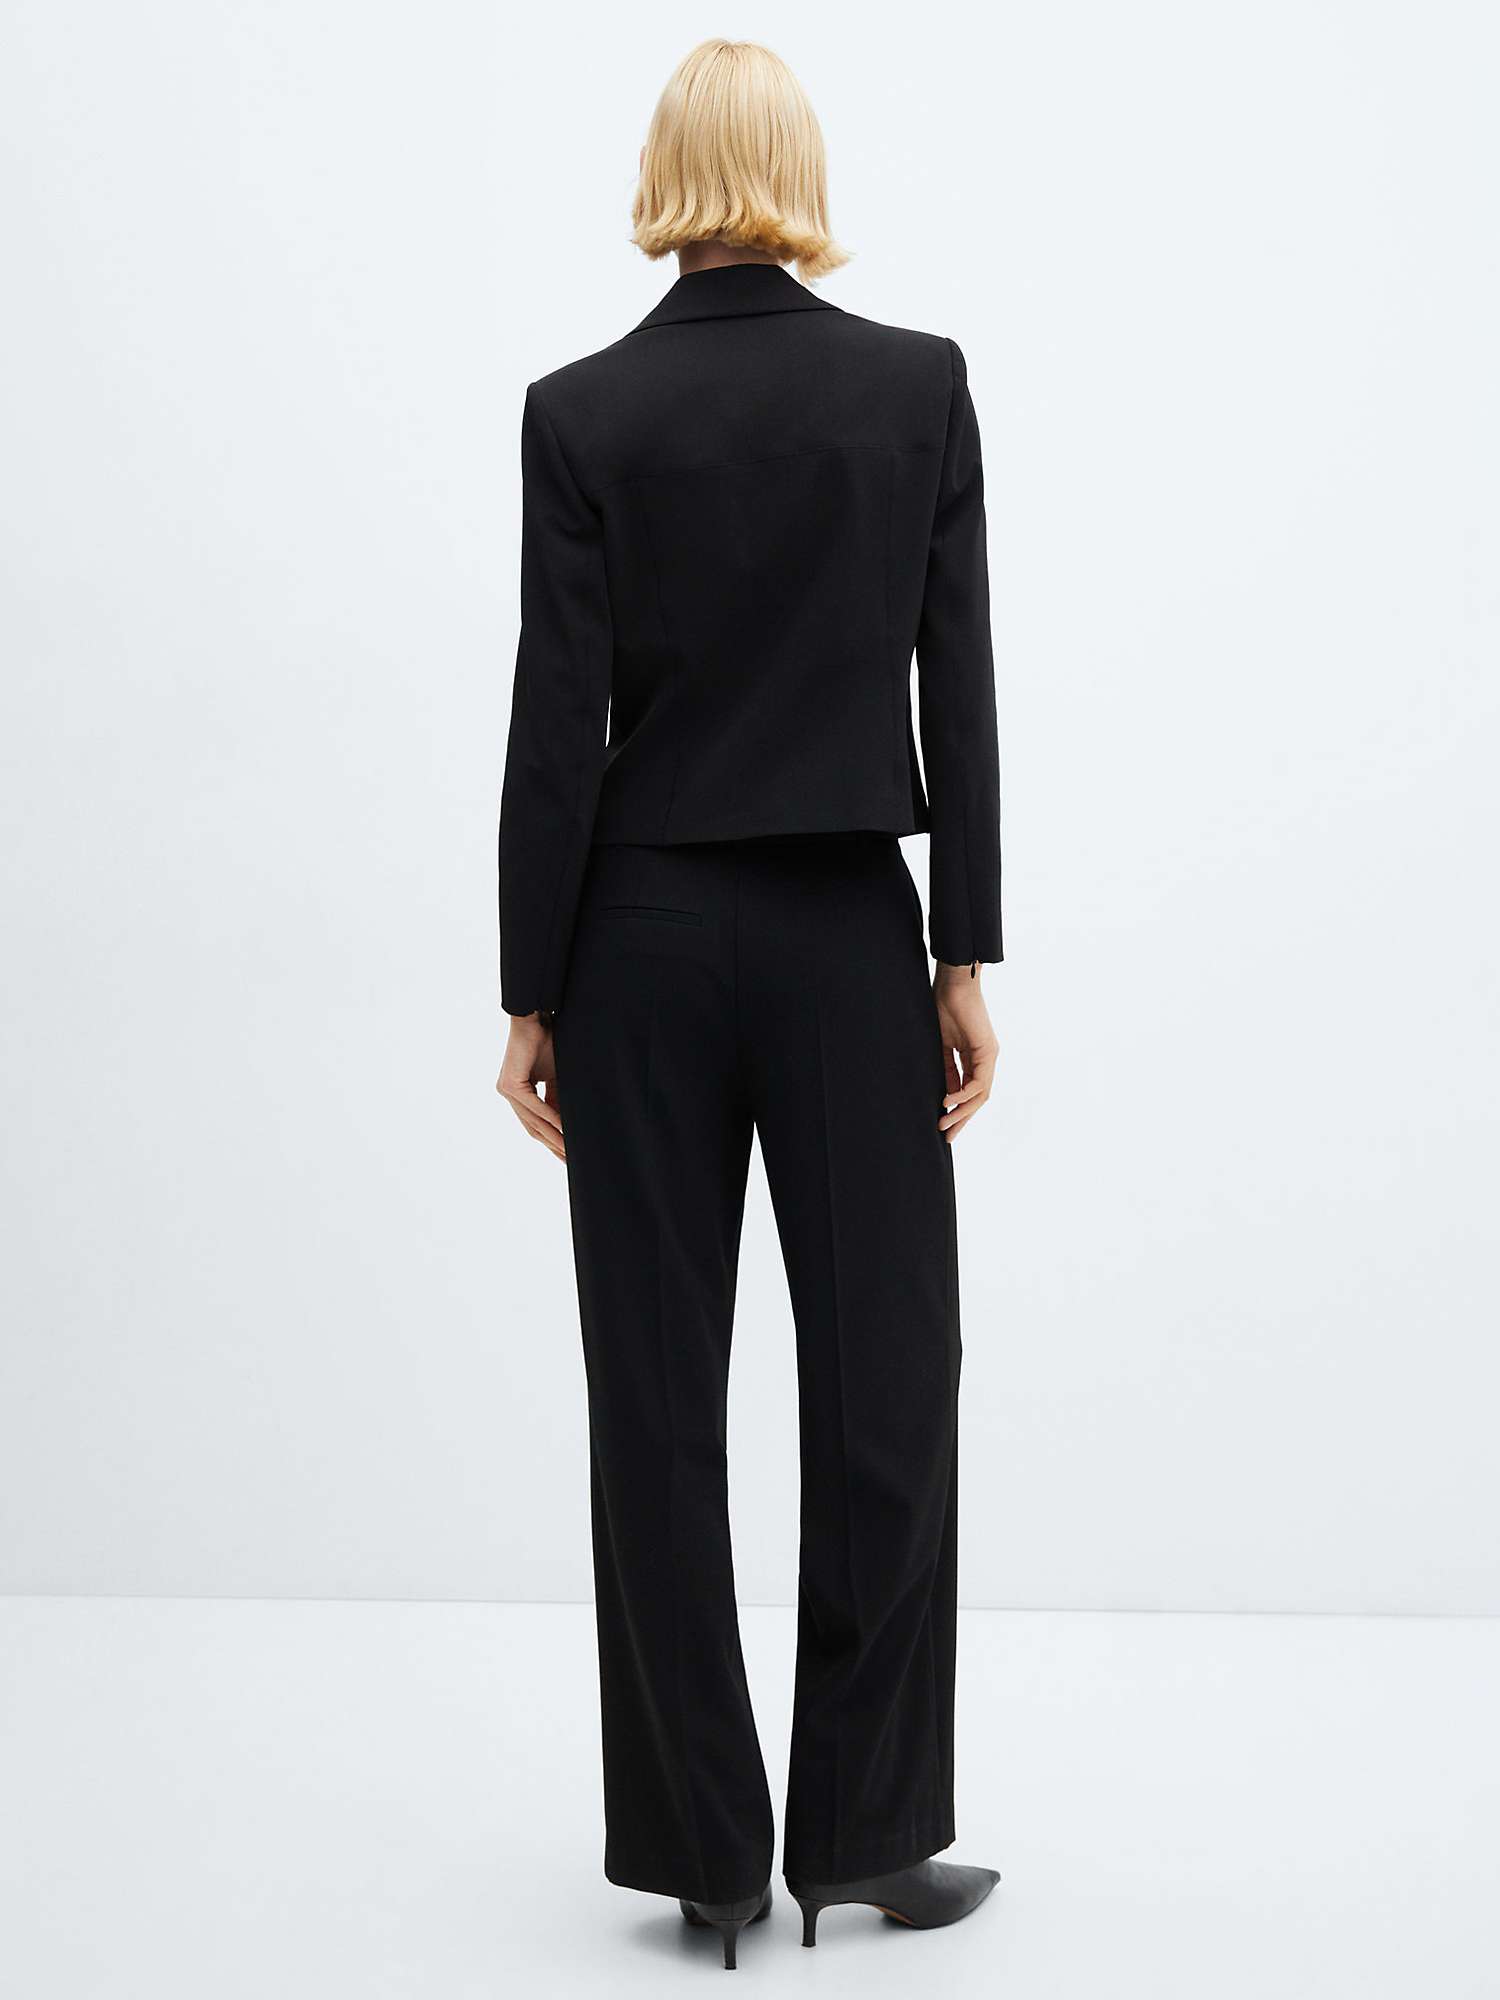 Buy Mango Carlosv Tailored Flared Trousers Online at johnlewis.com